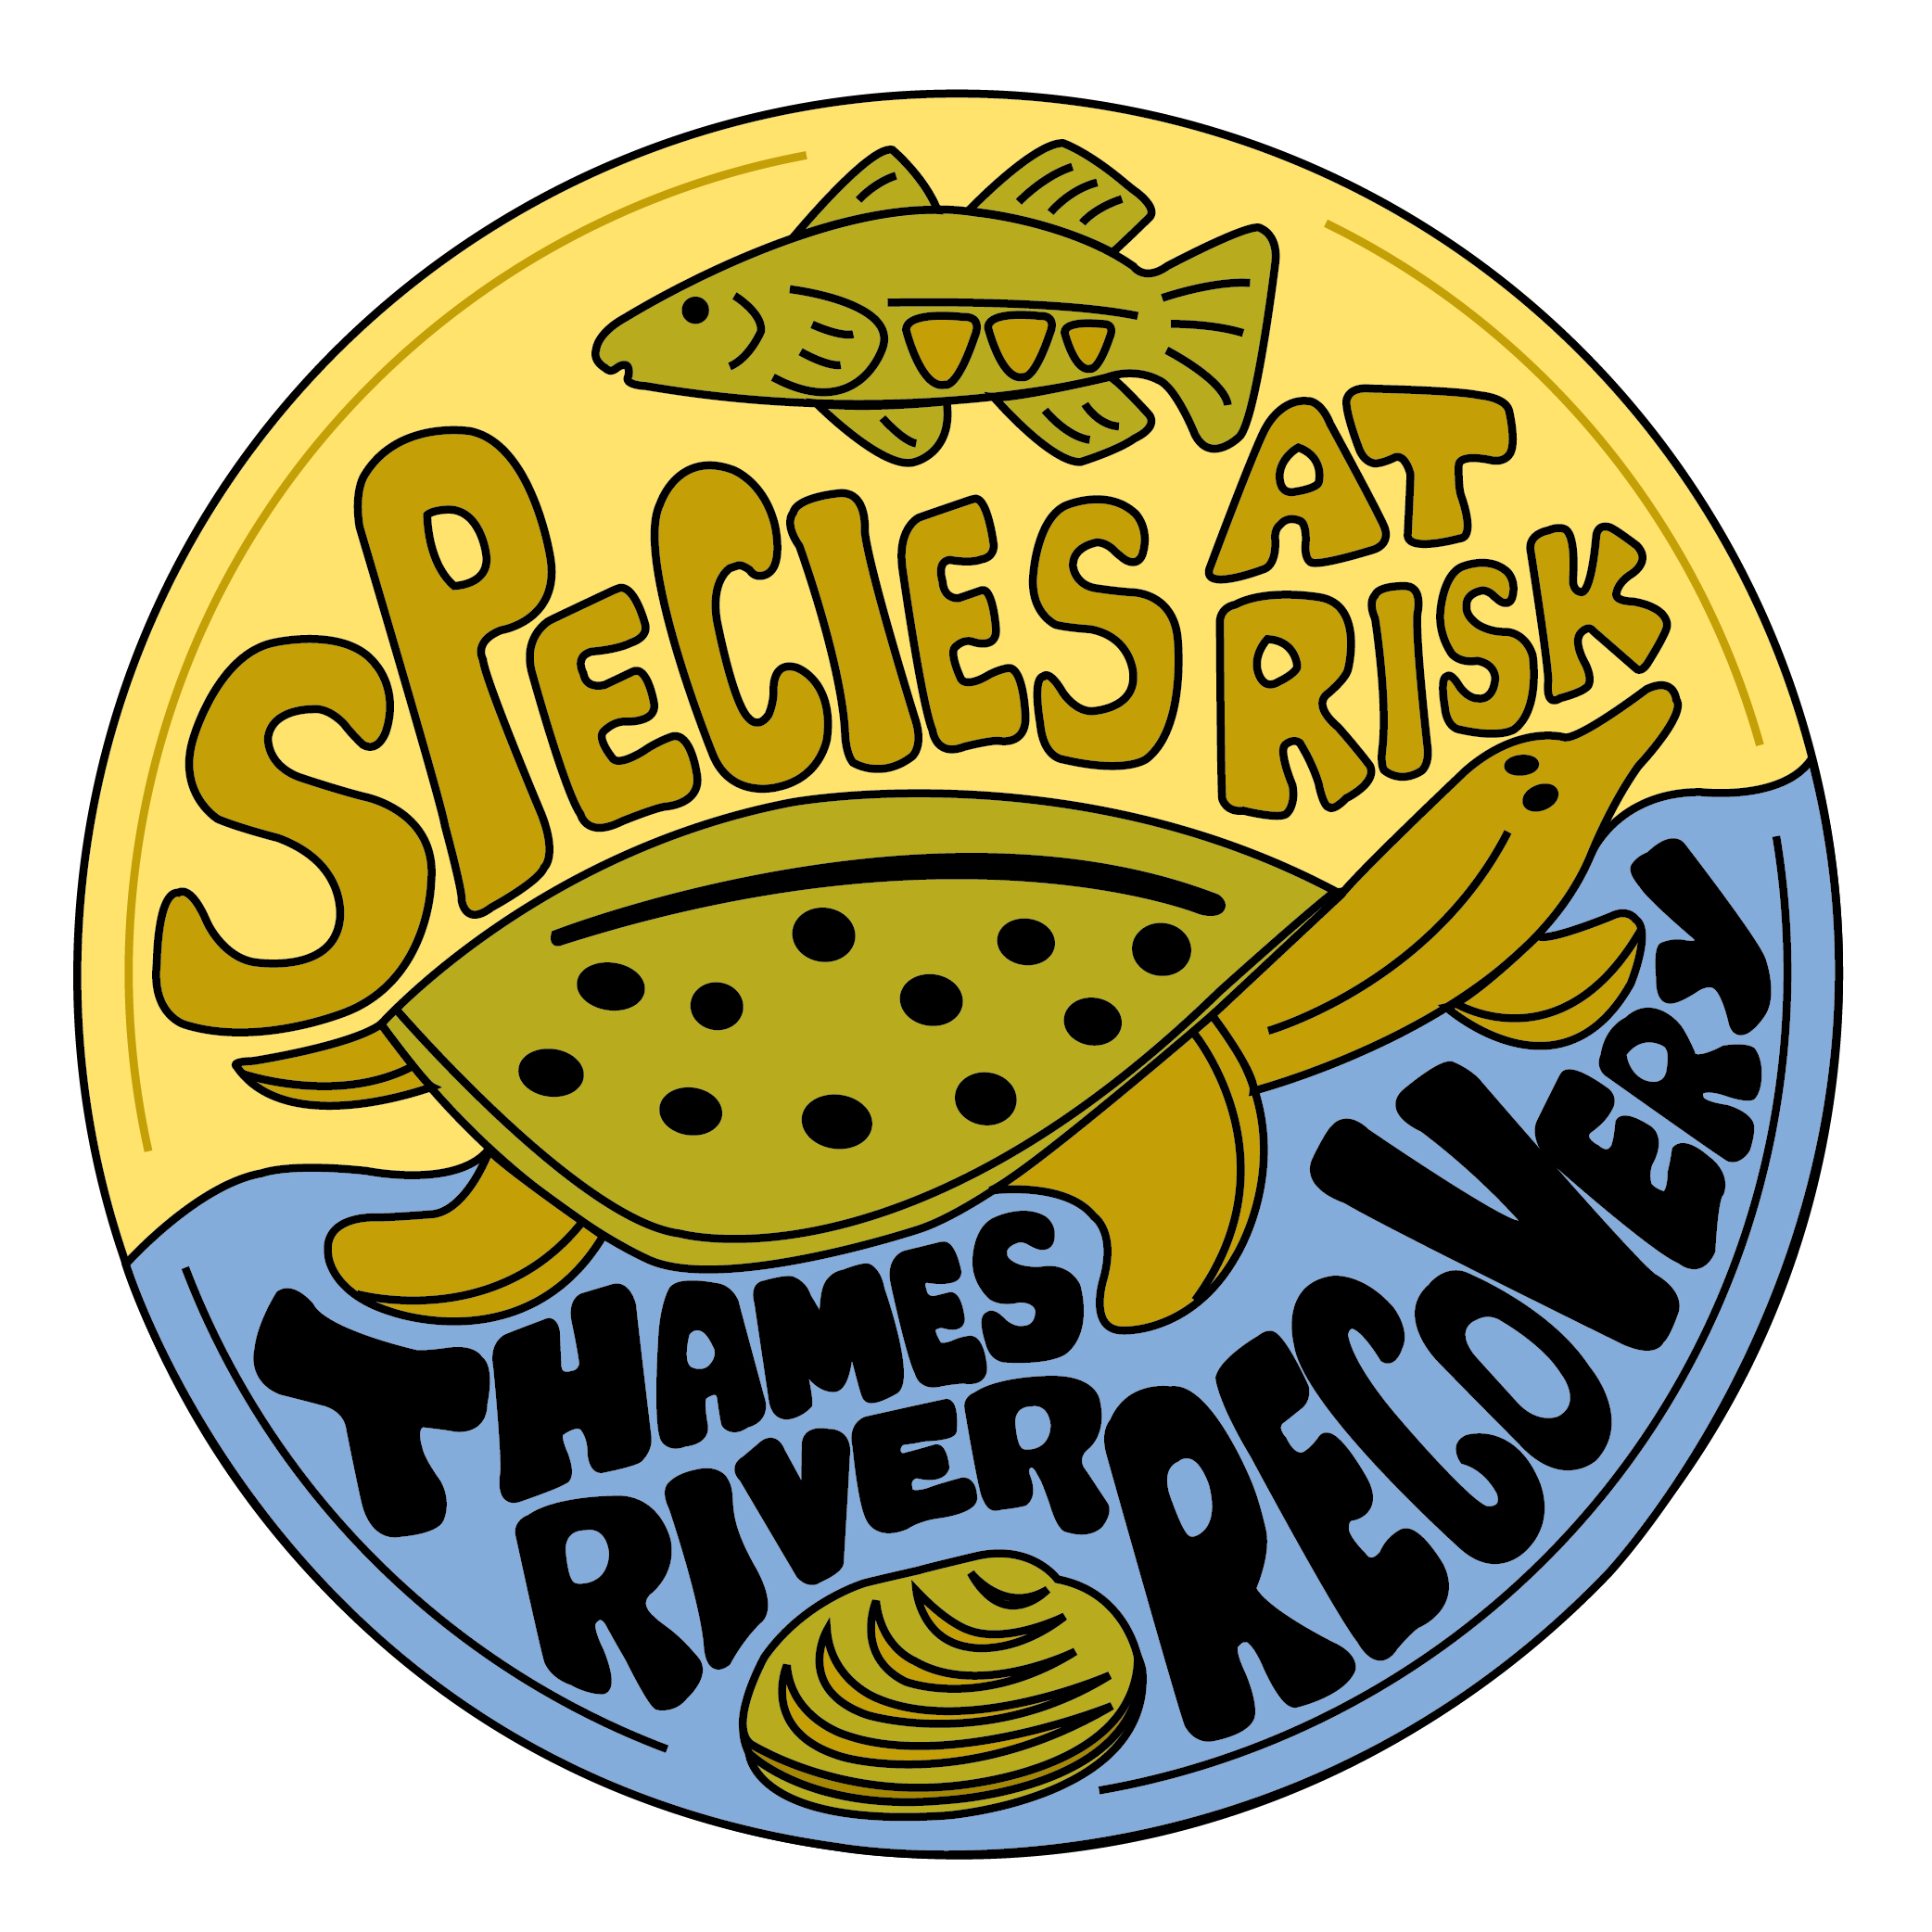 Thames River Species at Risk logo consisting of blue, green, and brown drawing of turtle, fish, and mussel with text